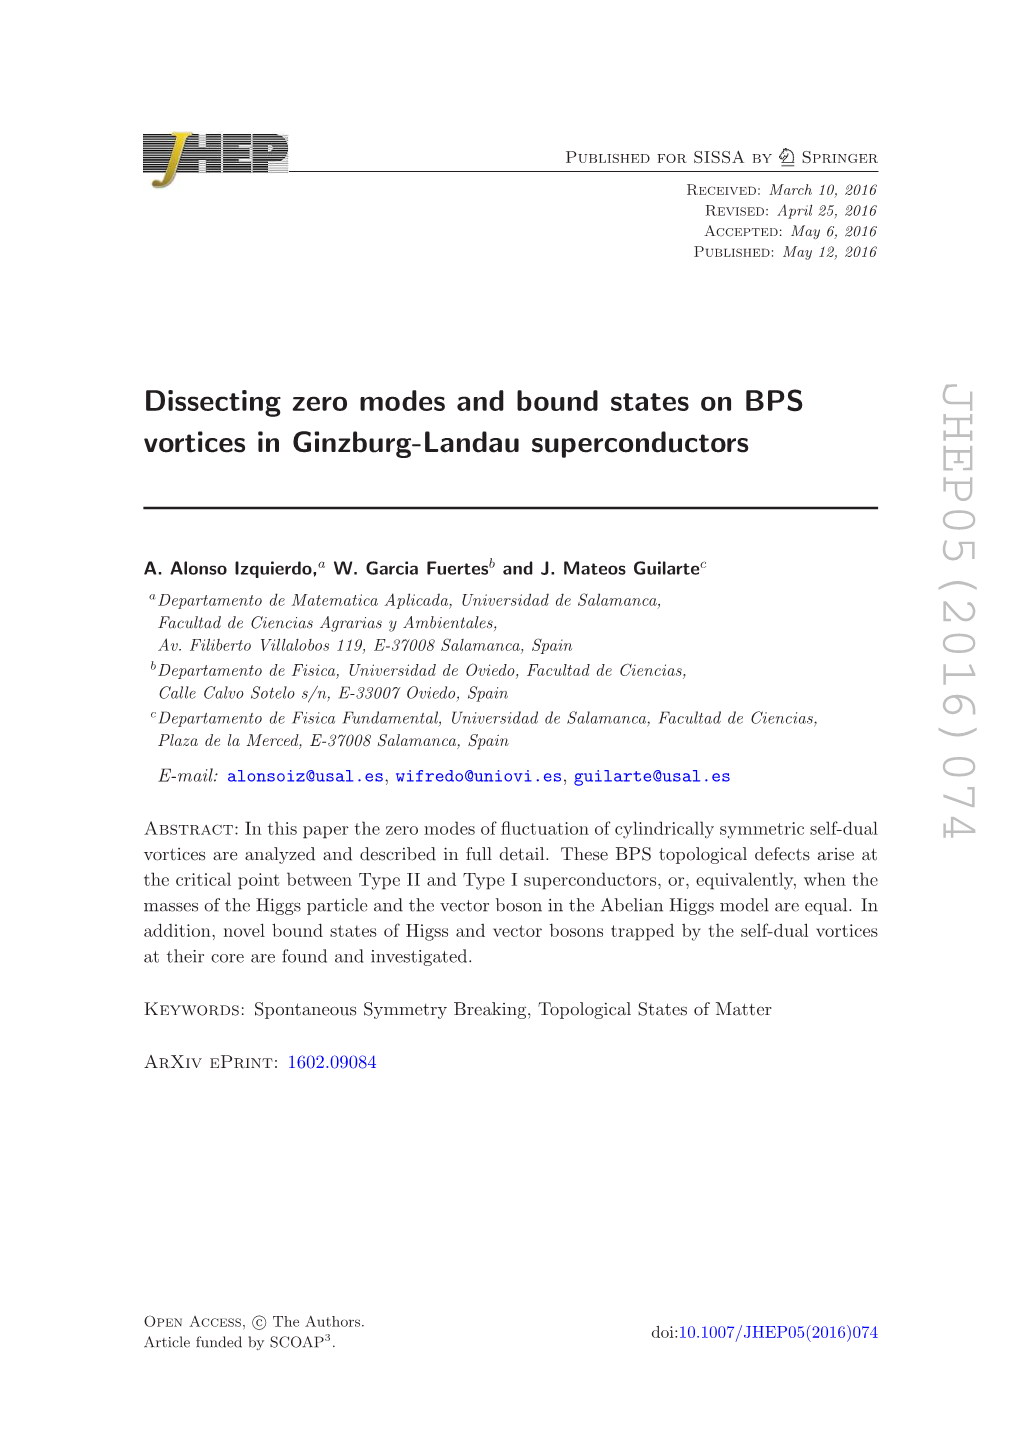 Dissecting Zero Modes and Bound States on BPS Vortices in Ginzburg